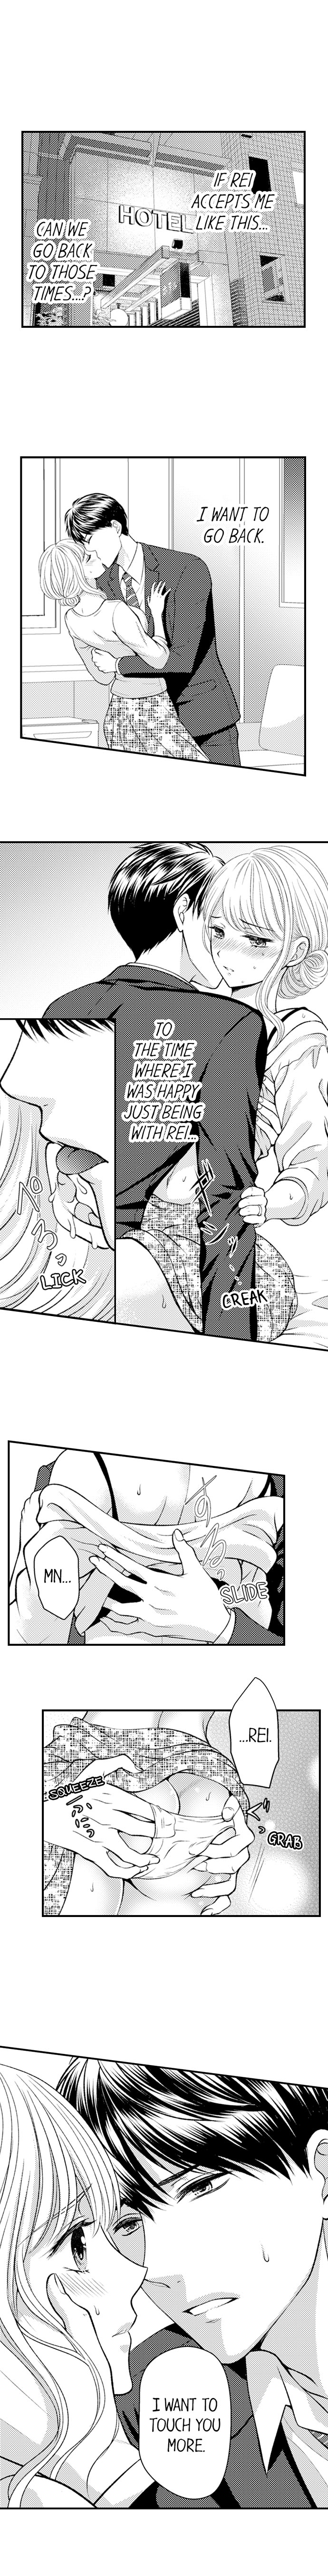 Cheating in a One-Sided Relationship - Chapter 12 Page 3